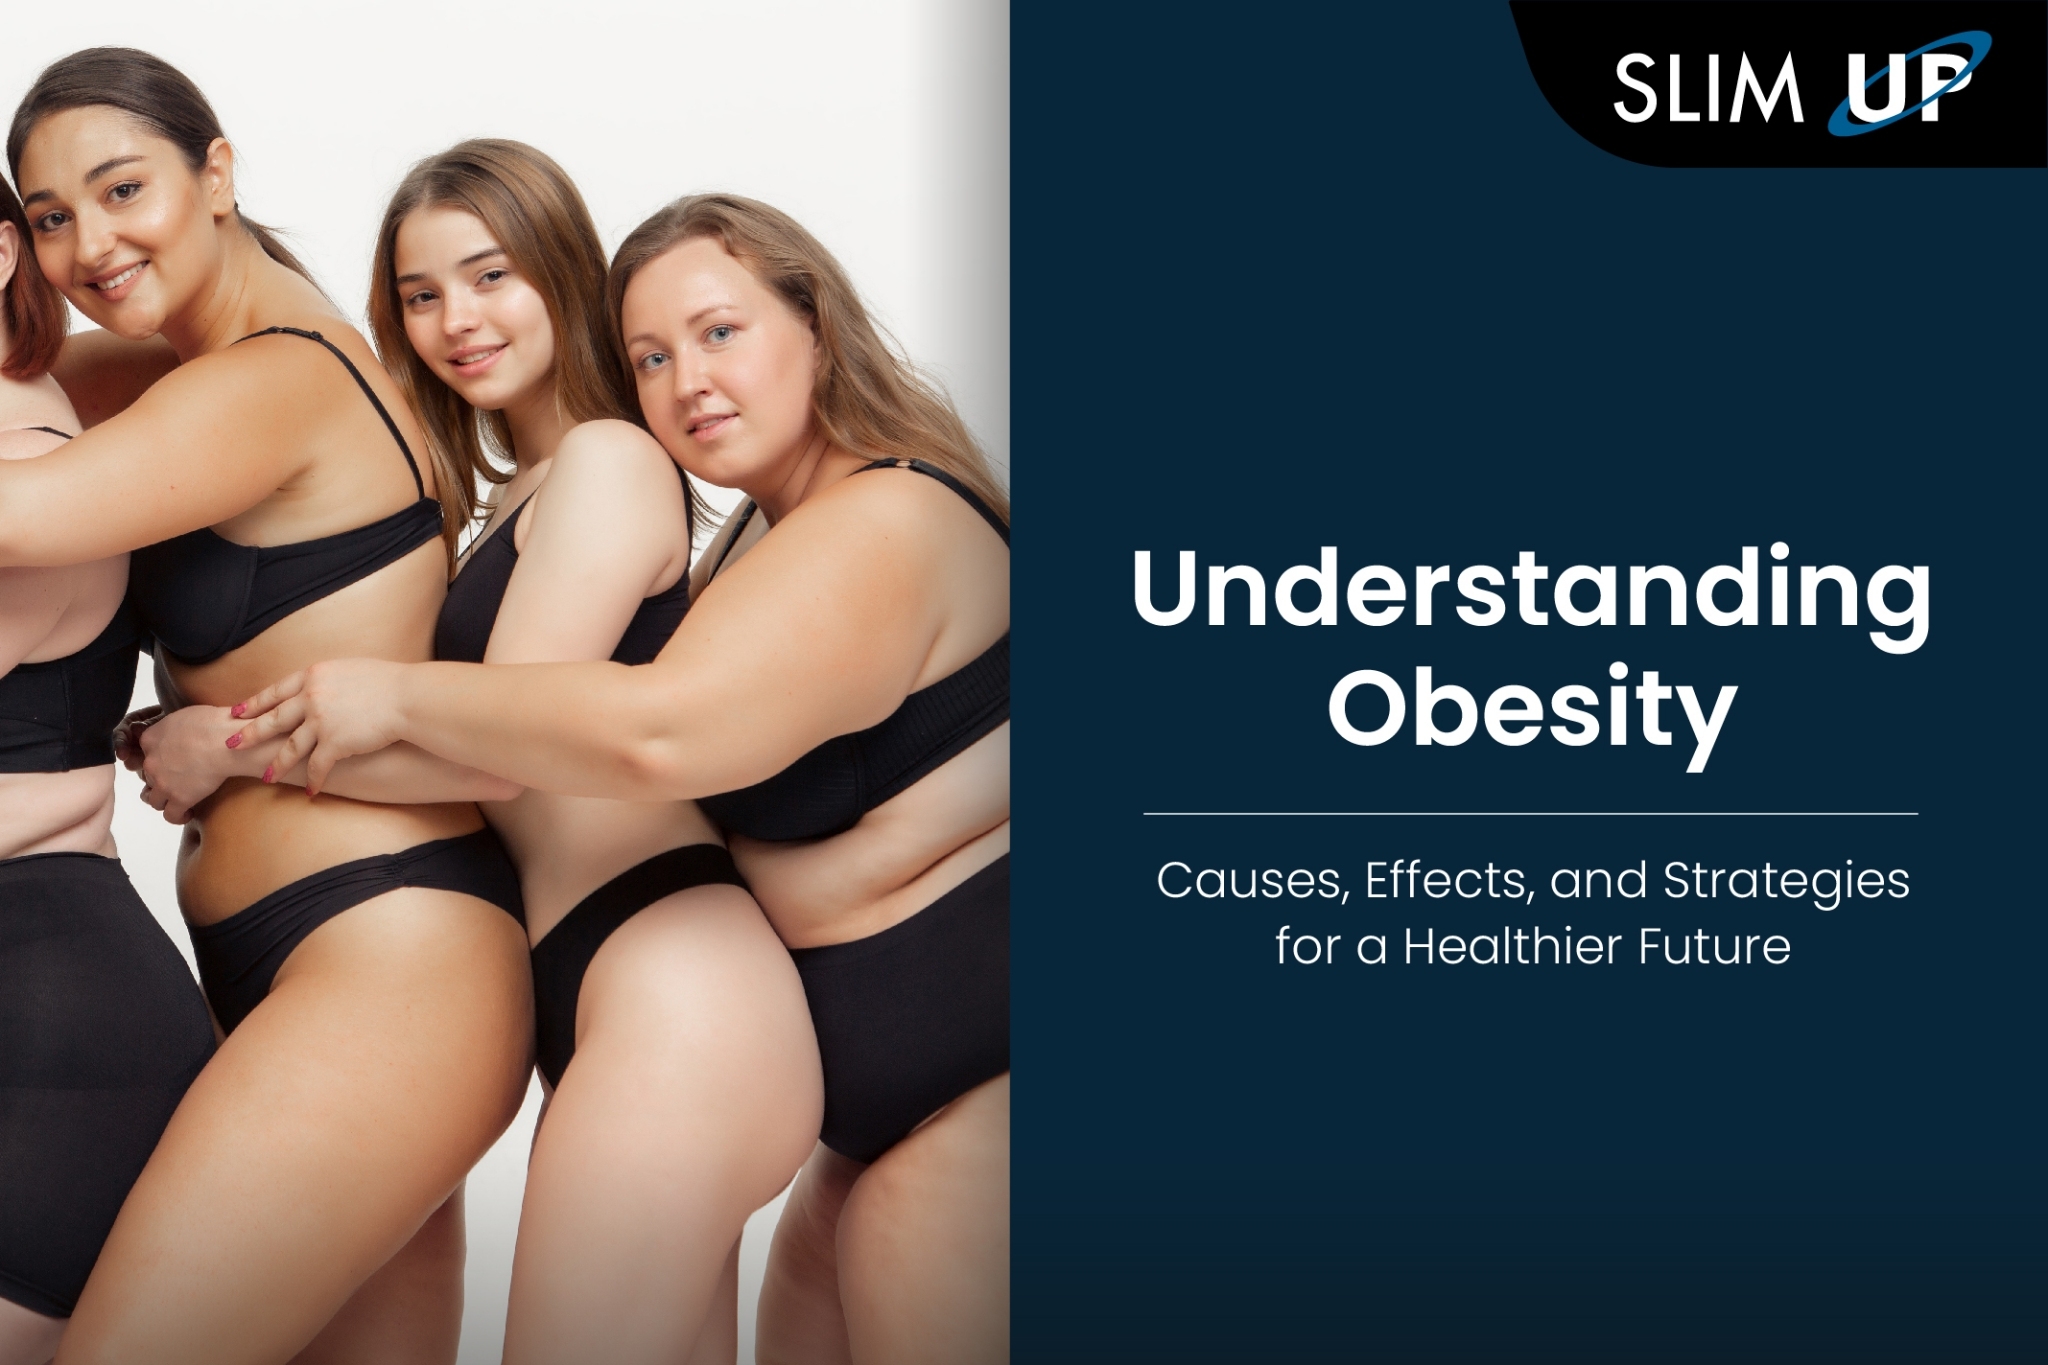 Understanding Obesity: Causes, Effects, and Strategies for a Healthier Future